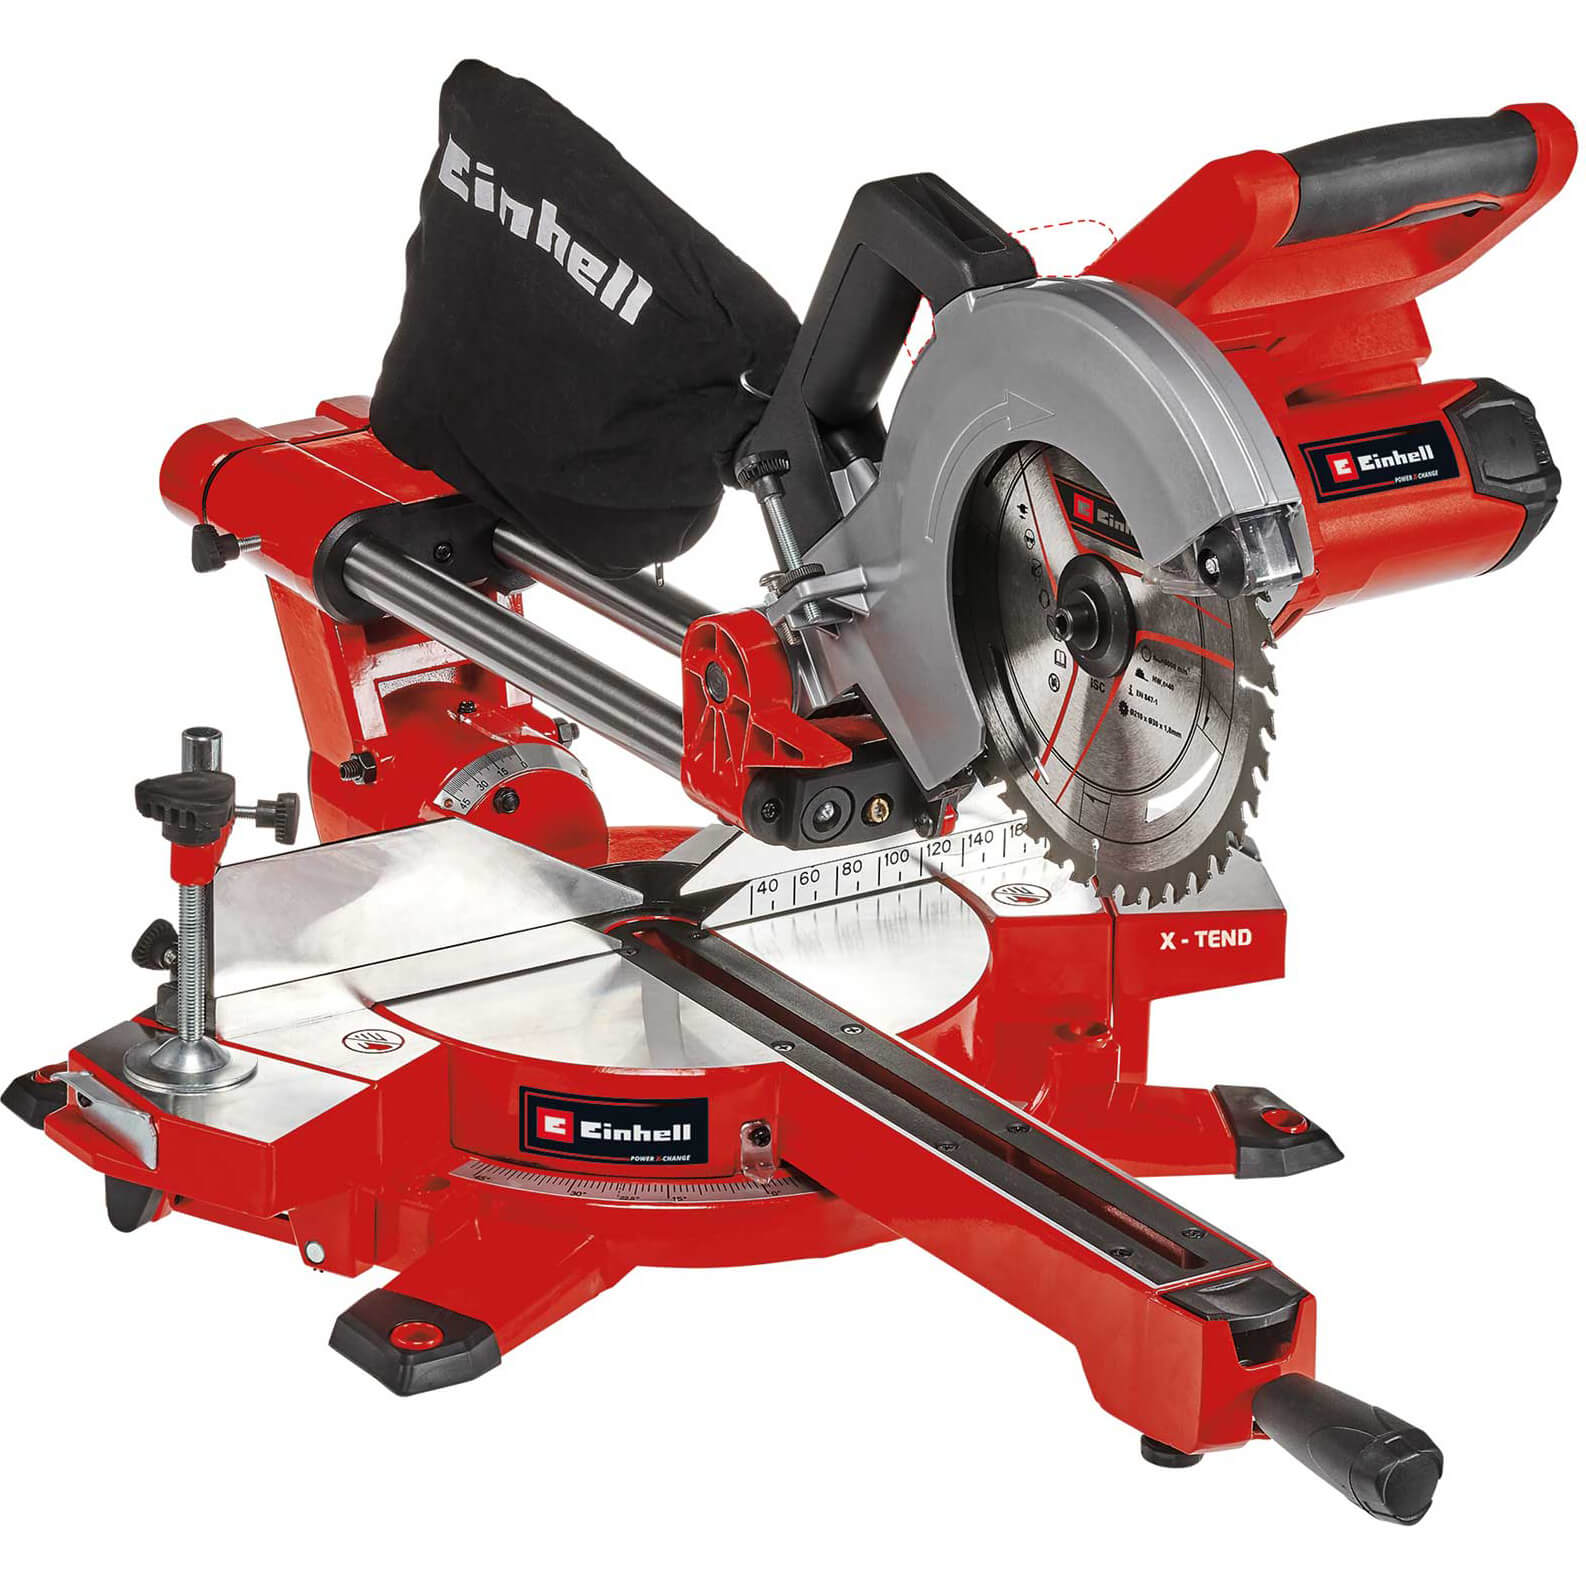 Image of Einhell TE-SM 36/210 36v Cordless Sliding Mitre Saw 210mm No Batteries No Charger No Case